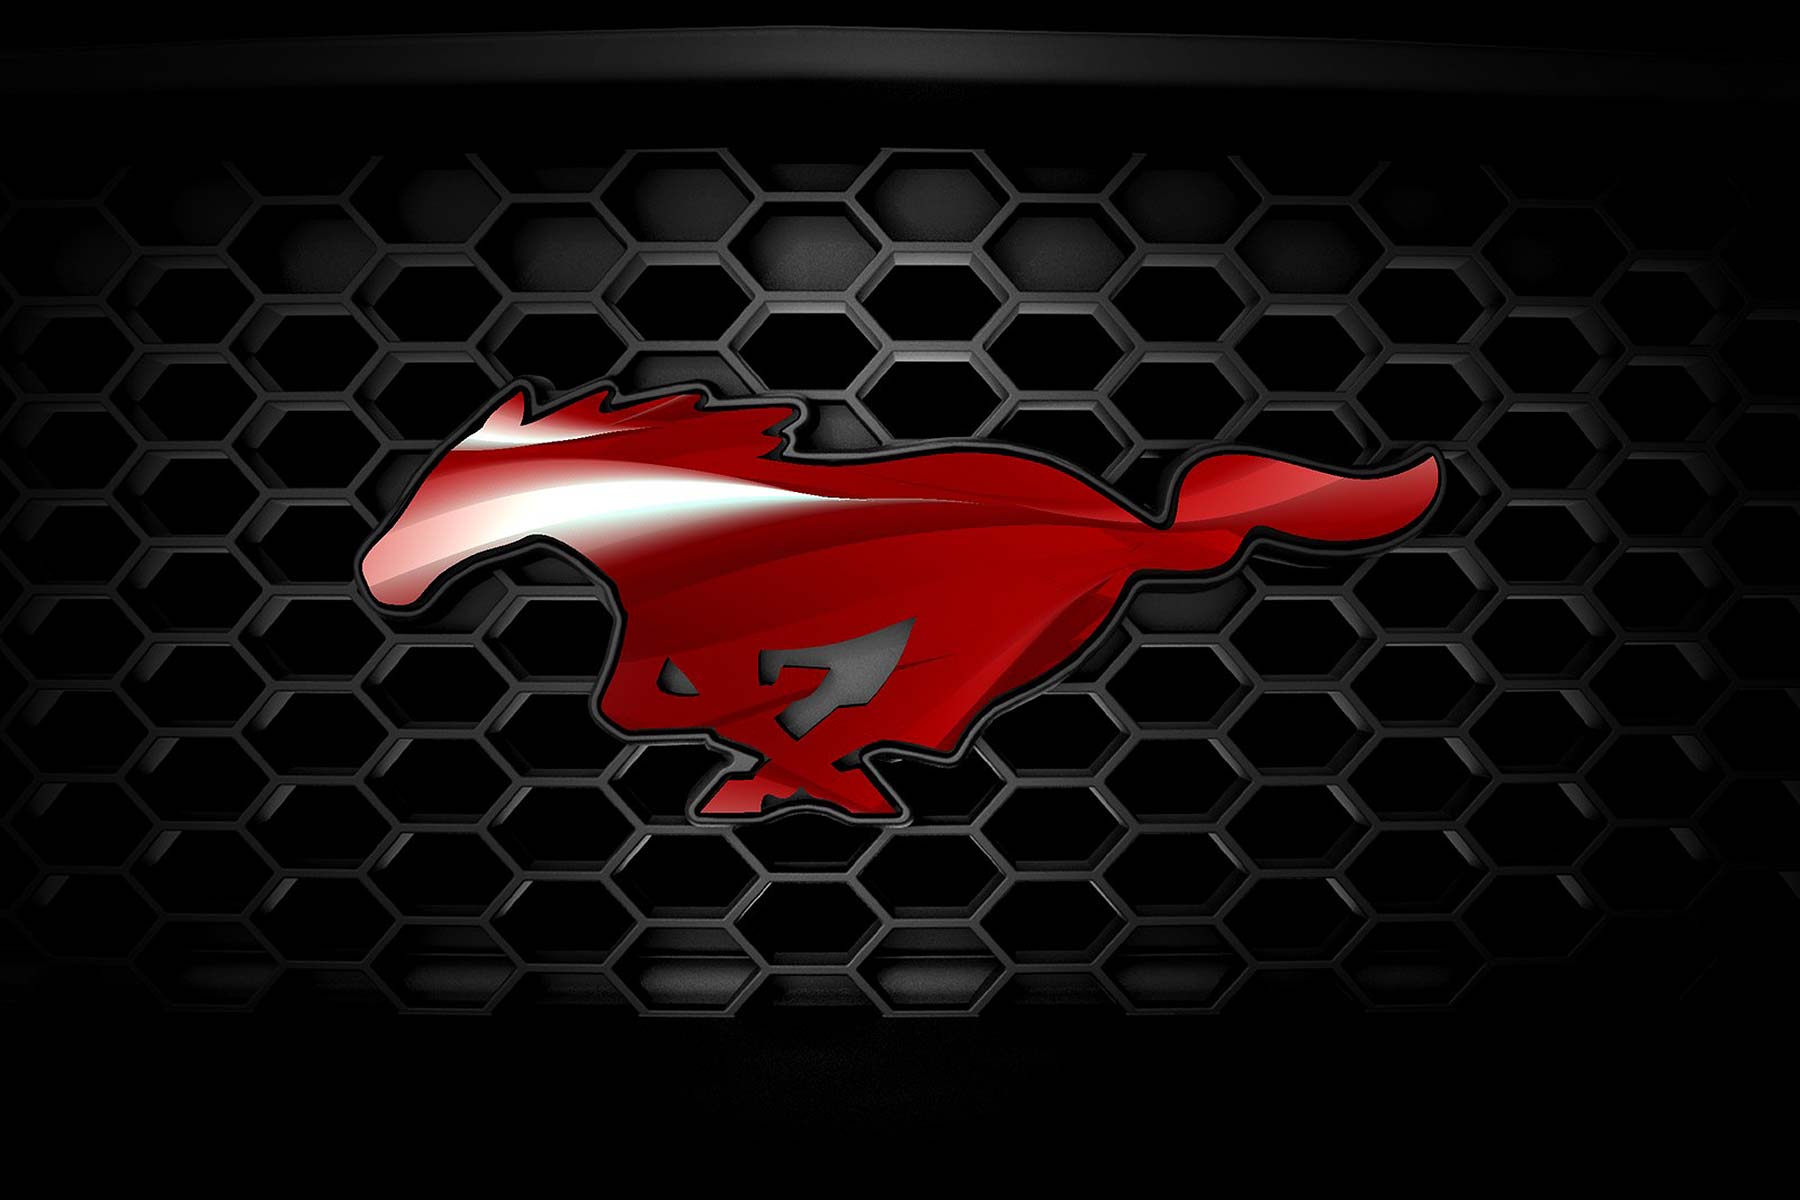 Ford Mustang Logo - Ford unveils Mustang badge customizer